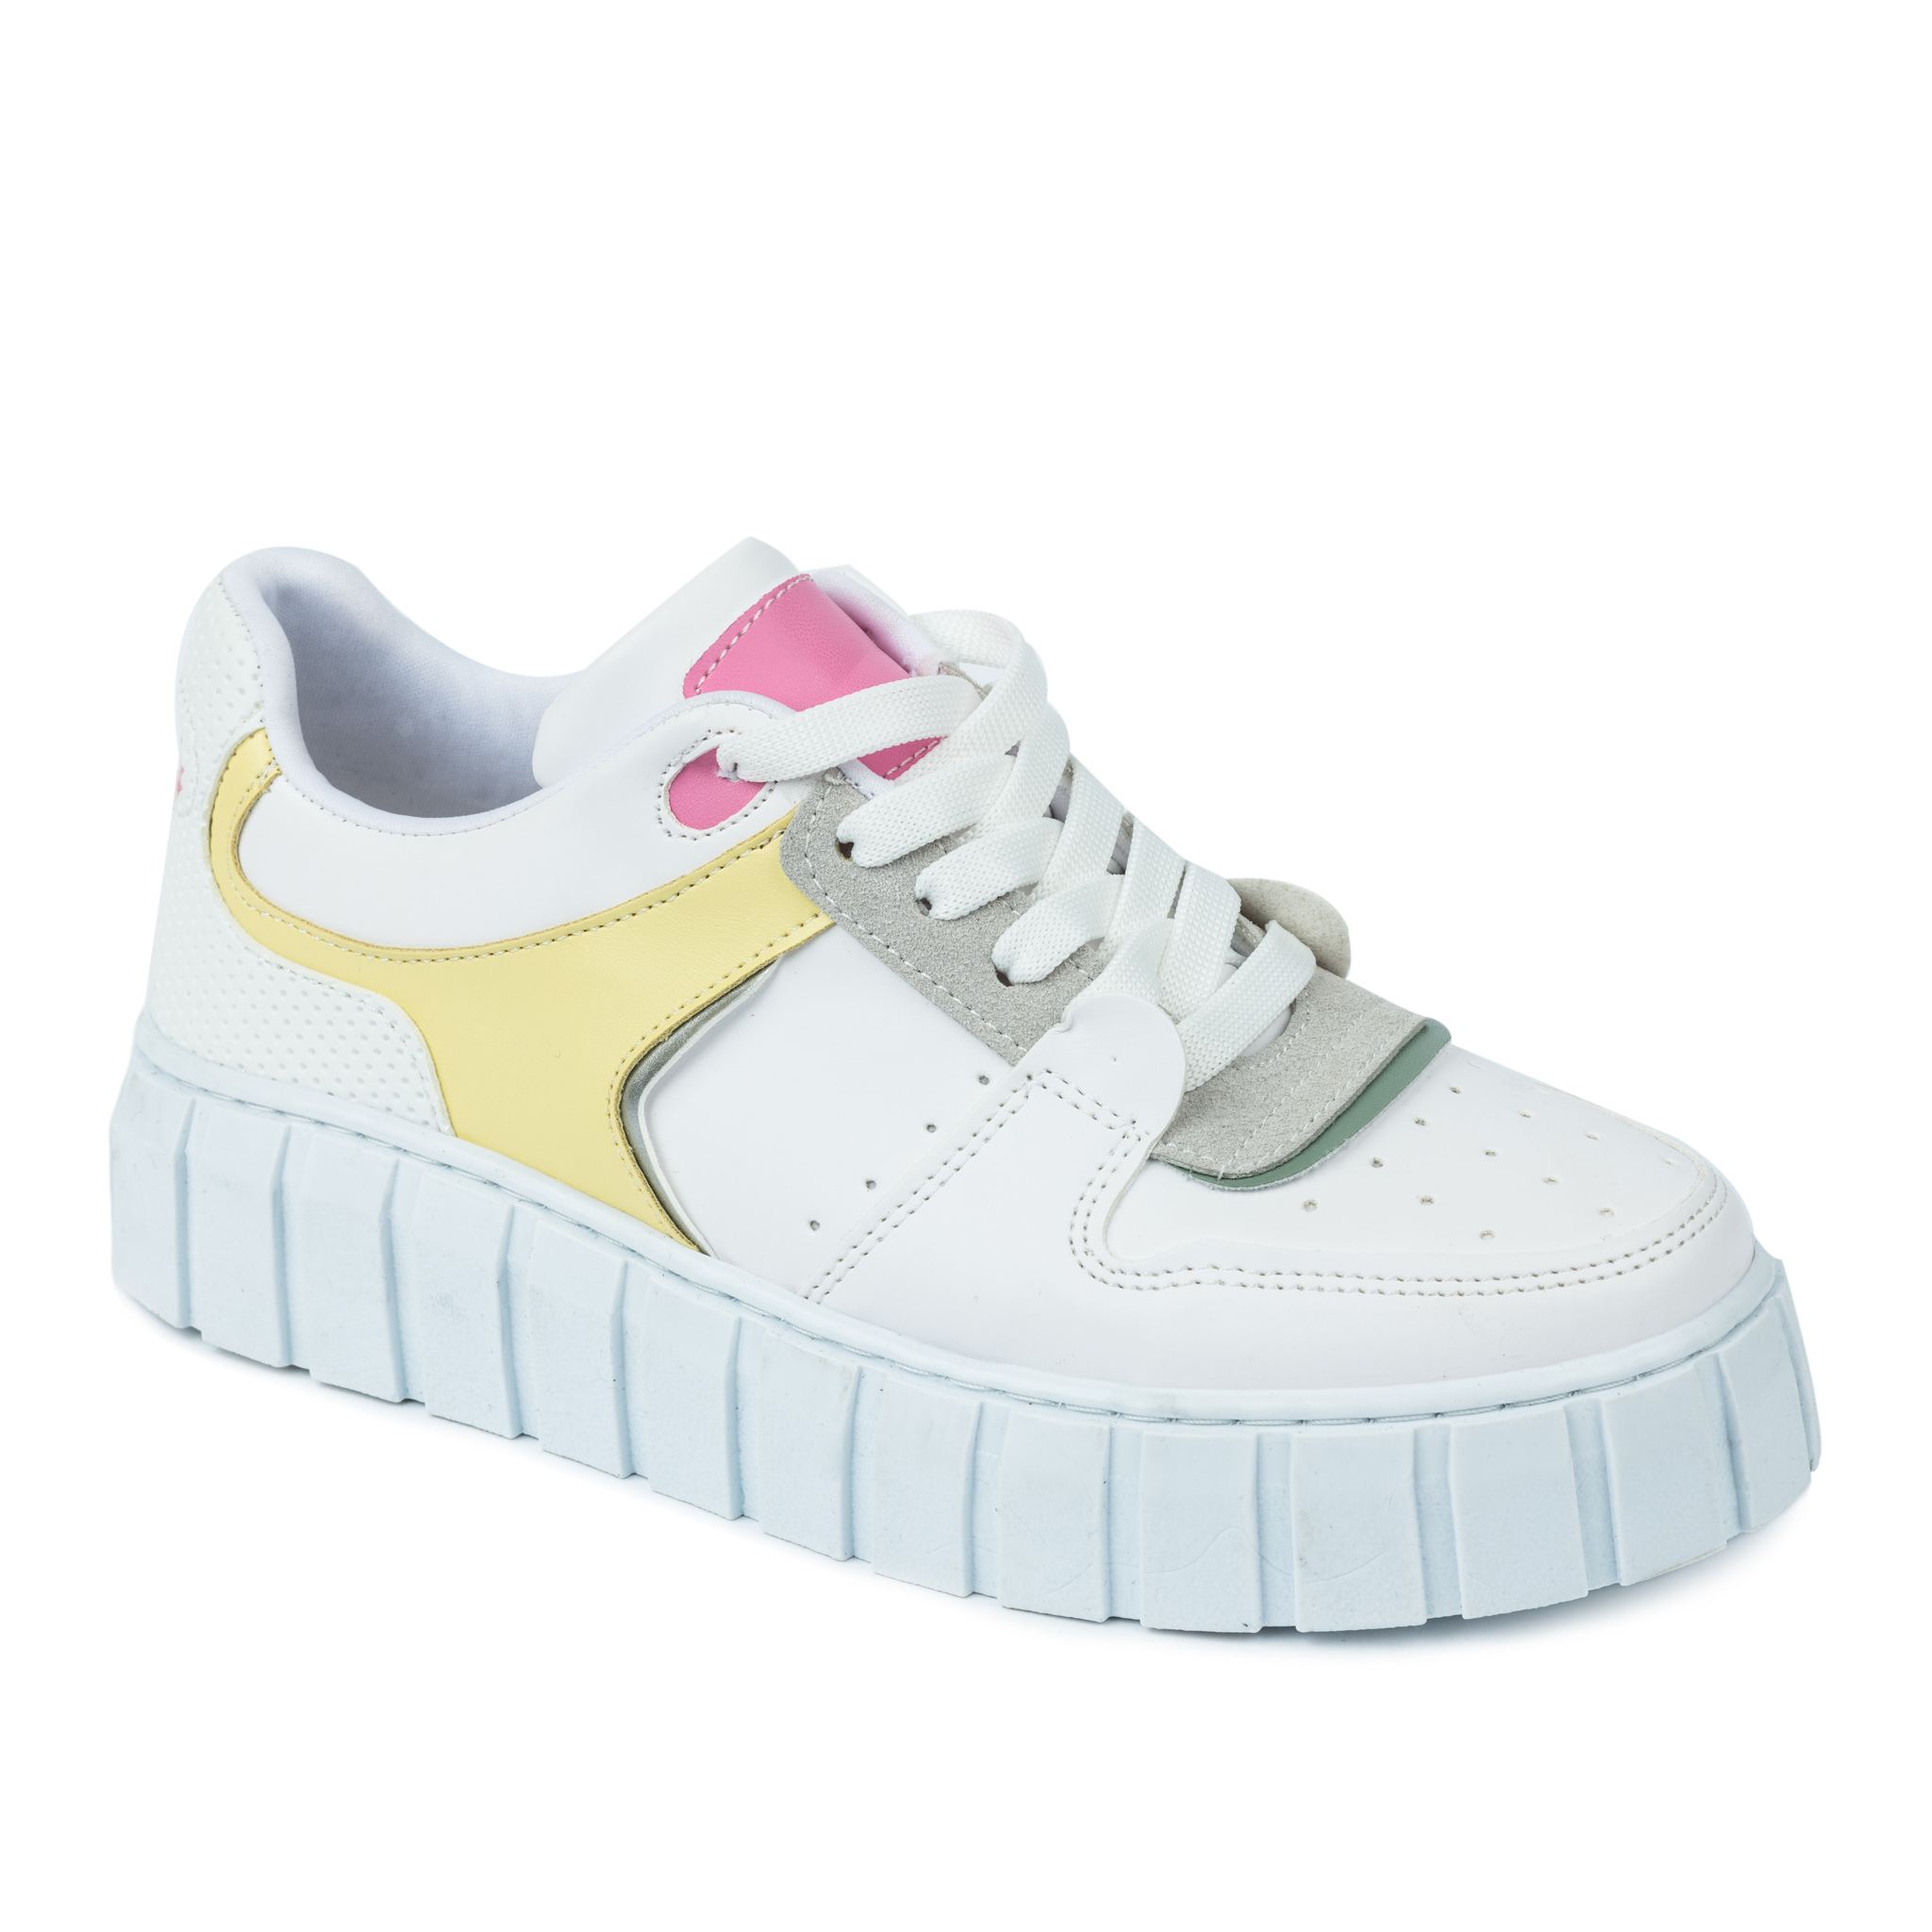 SNEAKERS WITH HIGH SOLE - WHITE